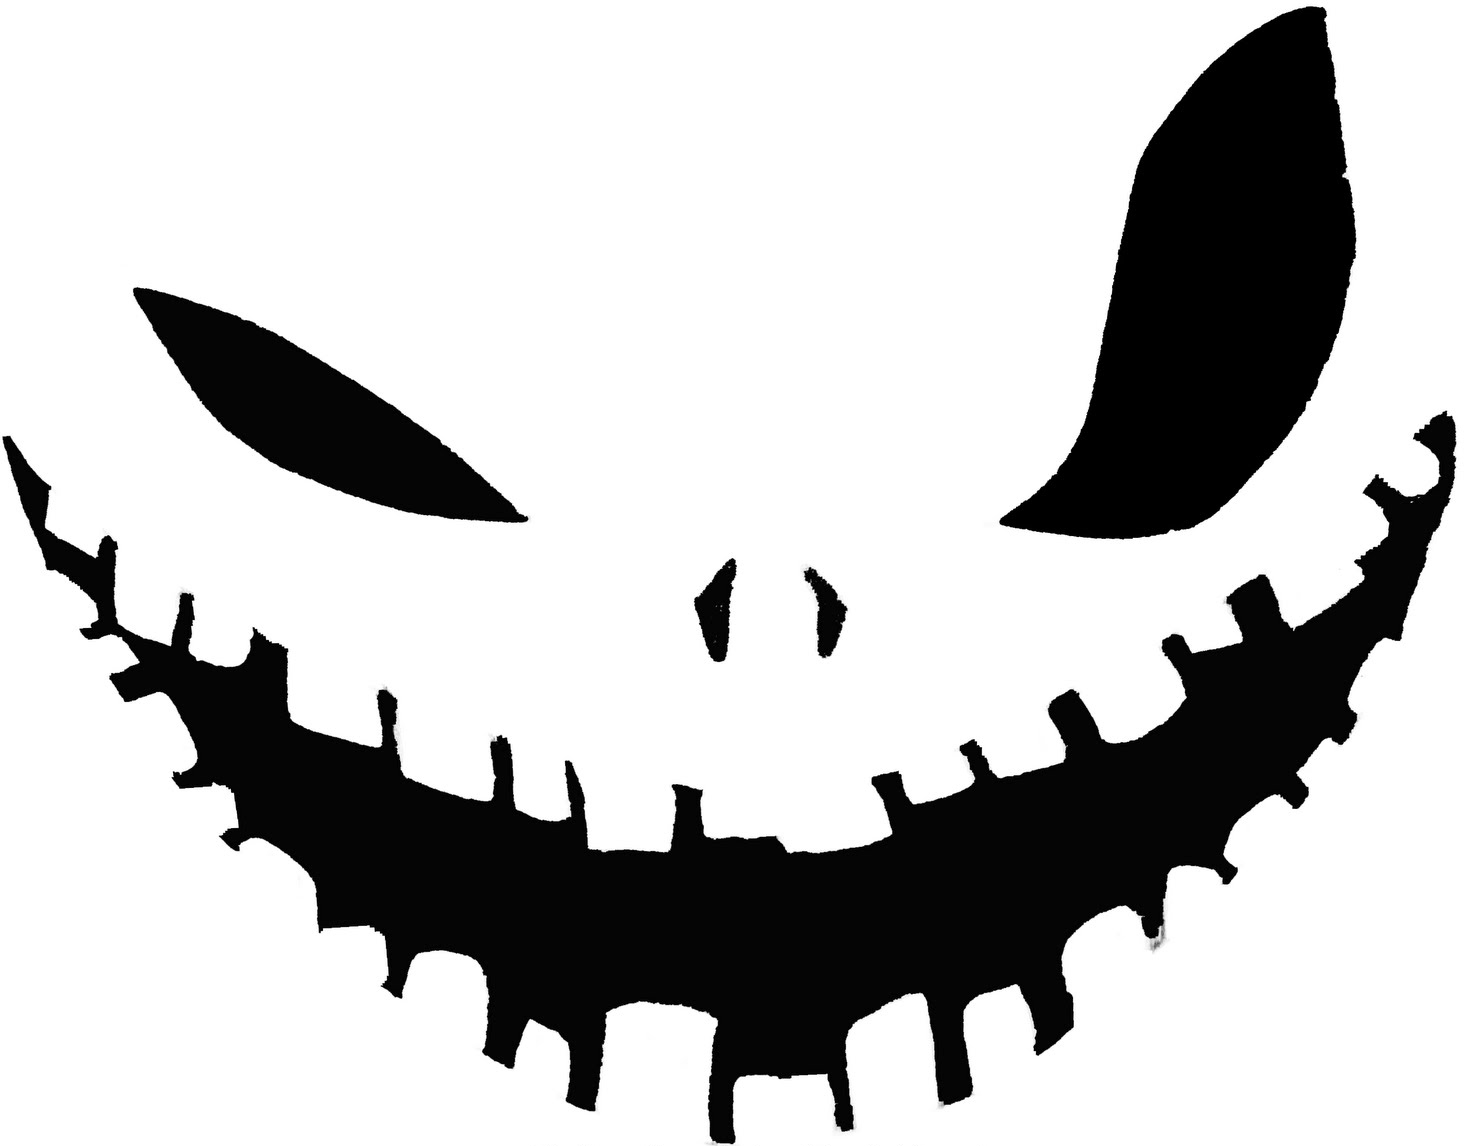 big_eye_wicked_smile Pumpkin Face Free Pumpkin Carving Template | 9st